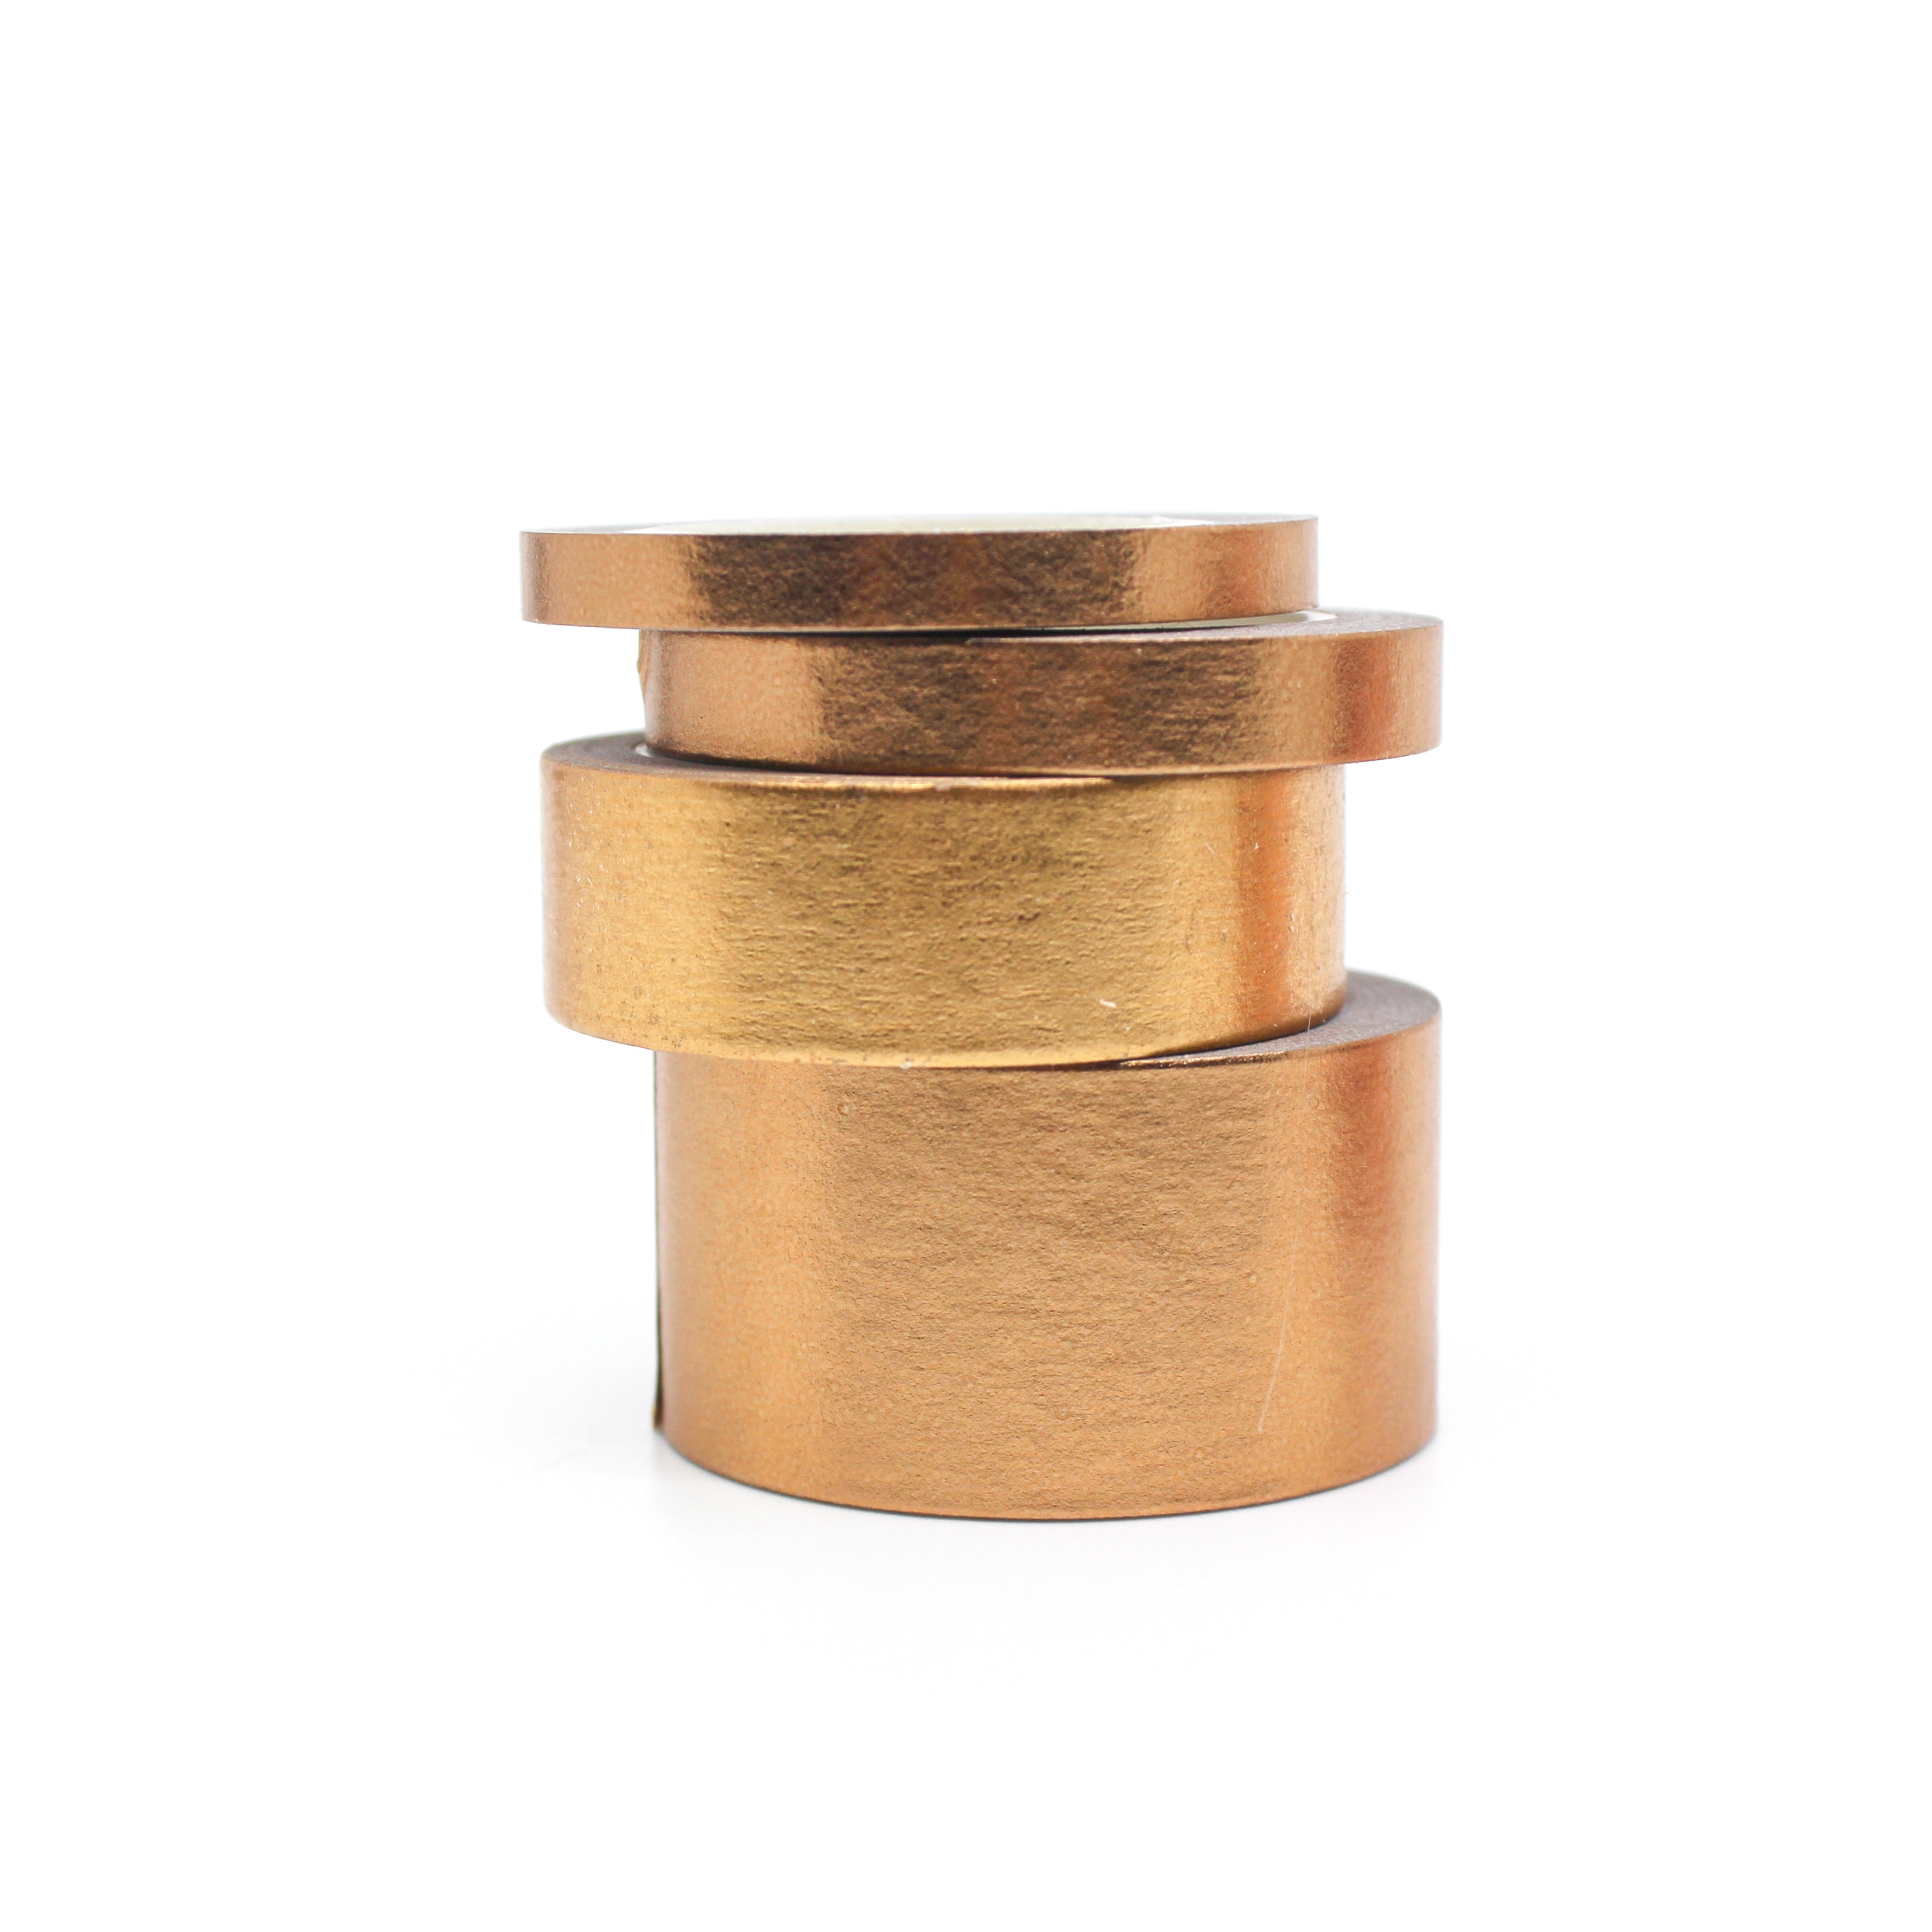 Add a touch of luxury to your crafts with our solid foil  washi tape, featuring a stunning metallic Copper finish that brings an elegant and glamorous flair to your projects. These solid foil tapes are only sold exclusively at BBB Supplies Craft Shop.